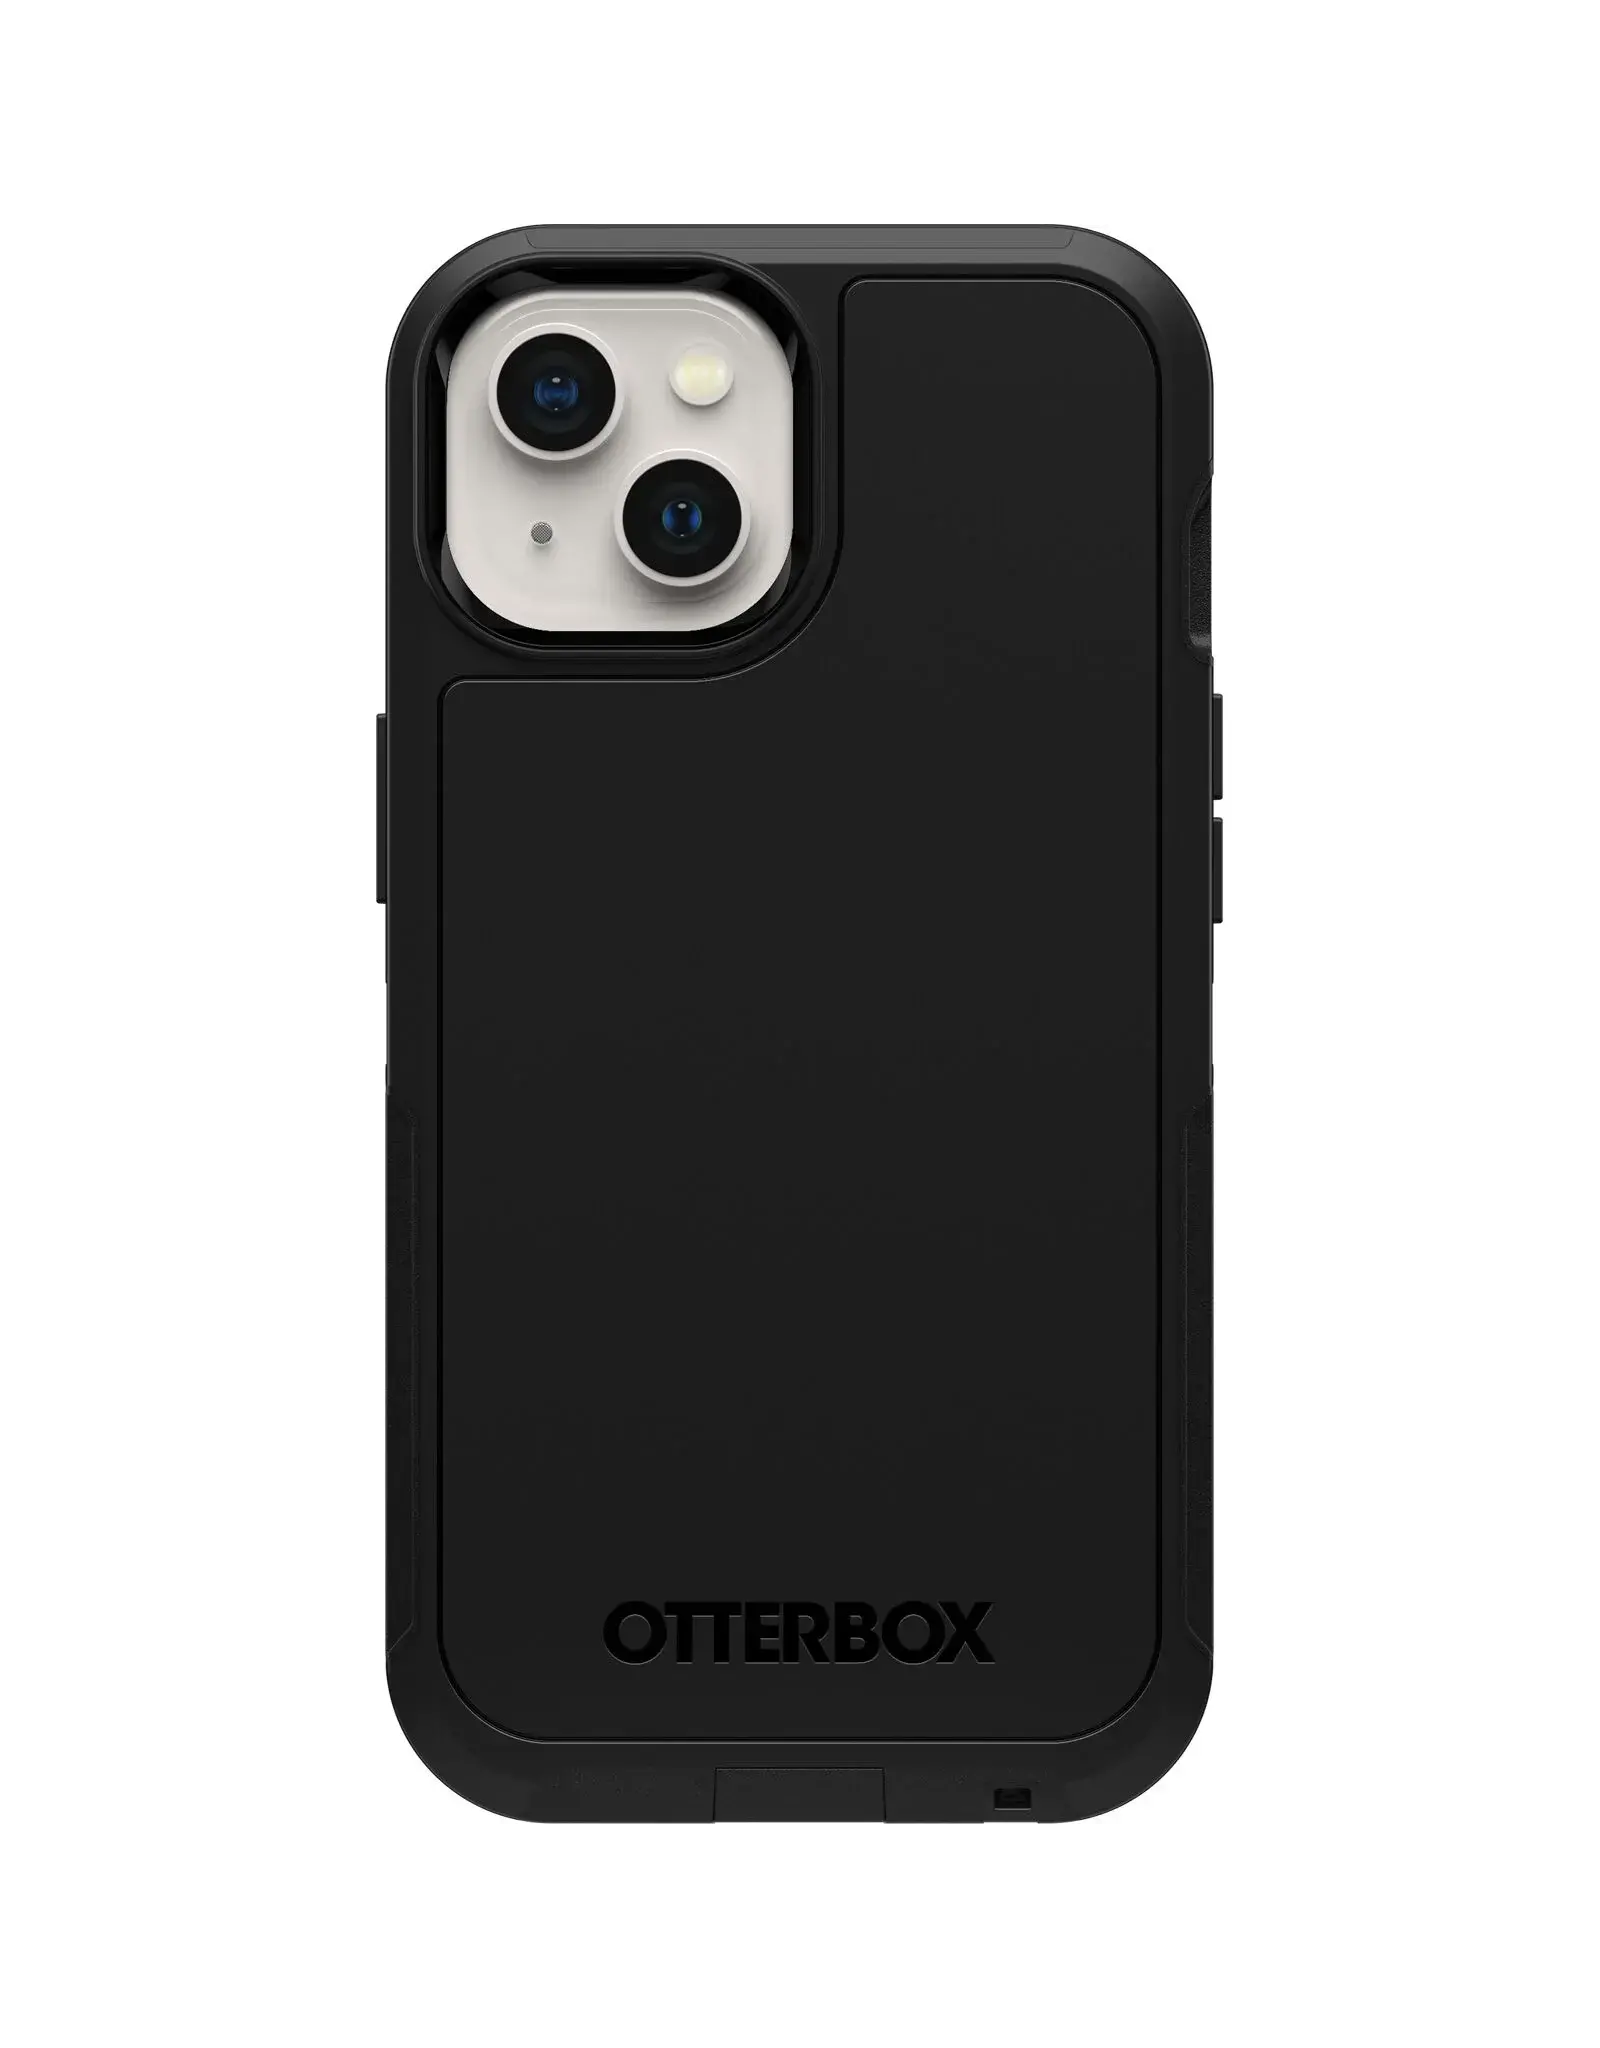 Otterbox OtterBox Defender XT Case for iPhone 13 - Black